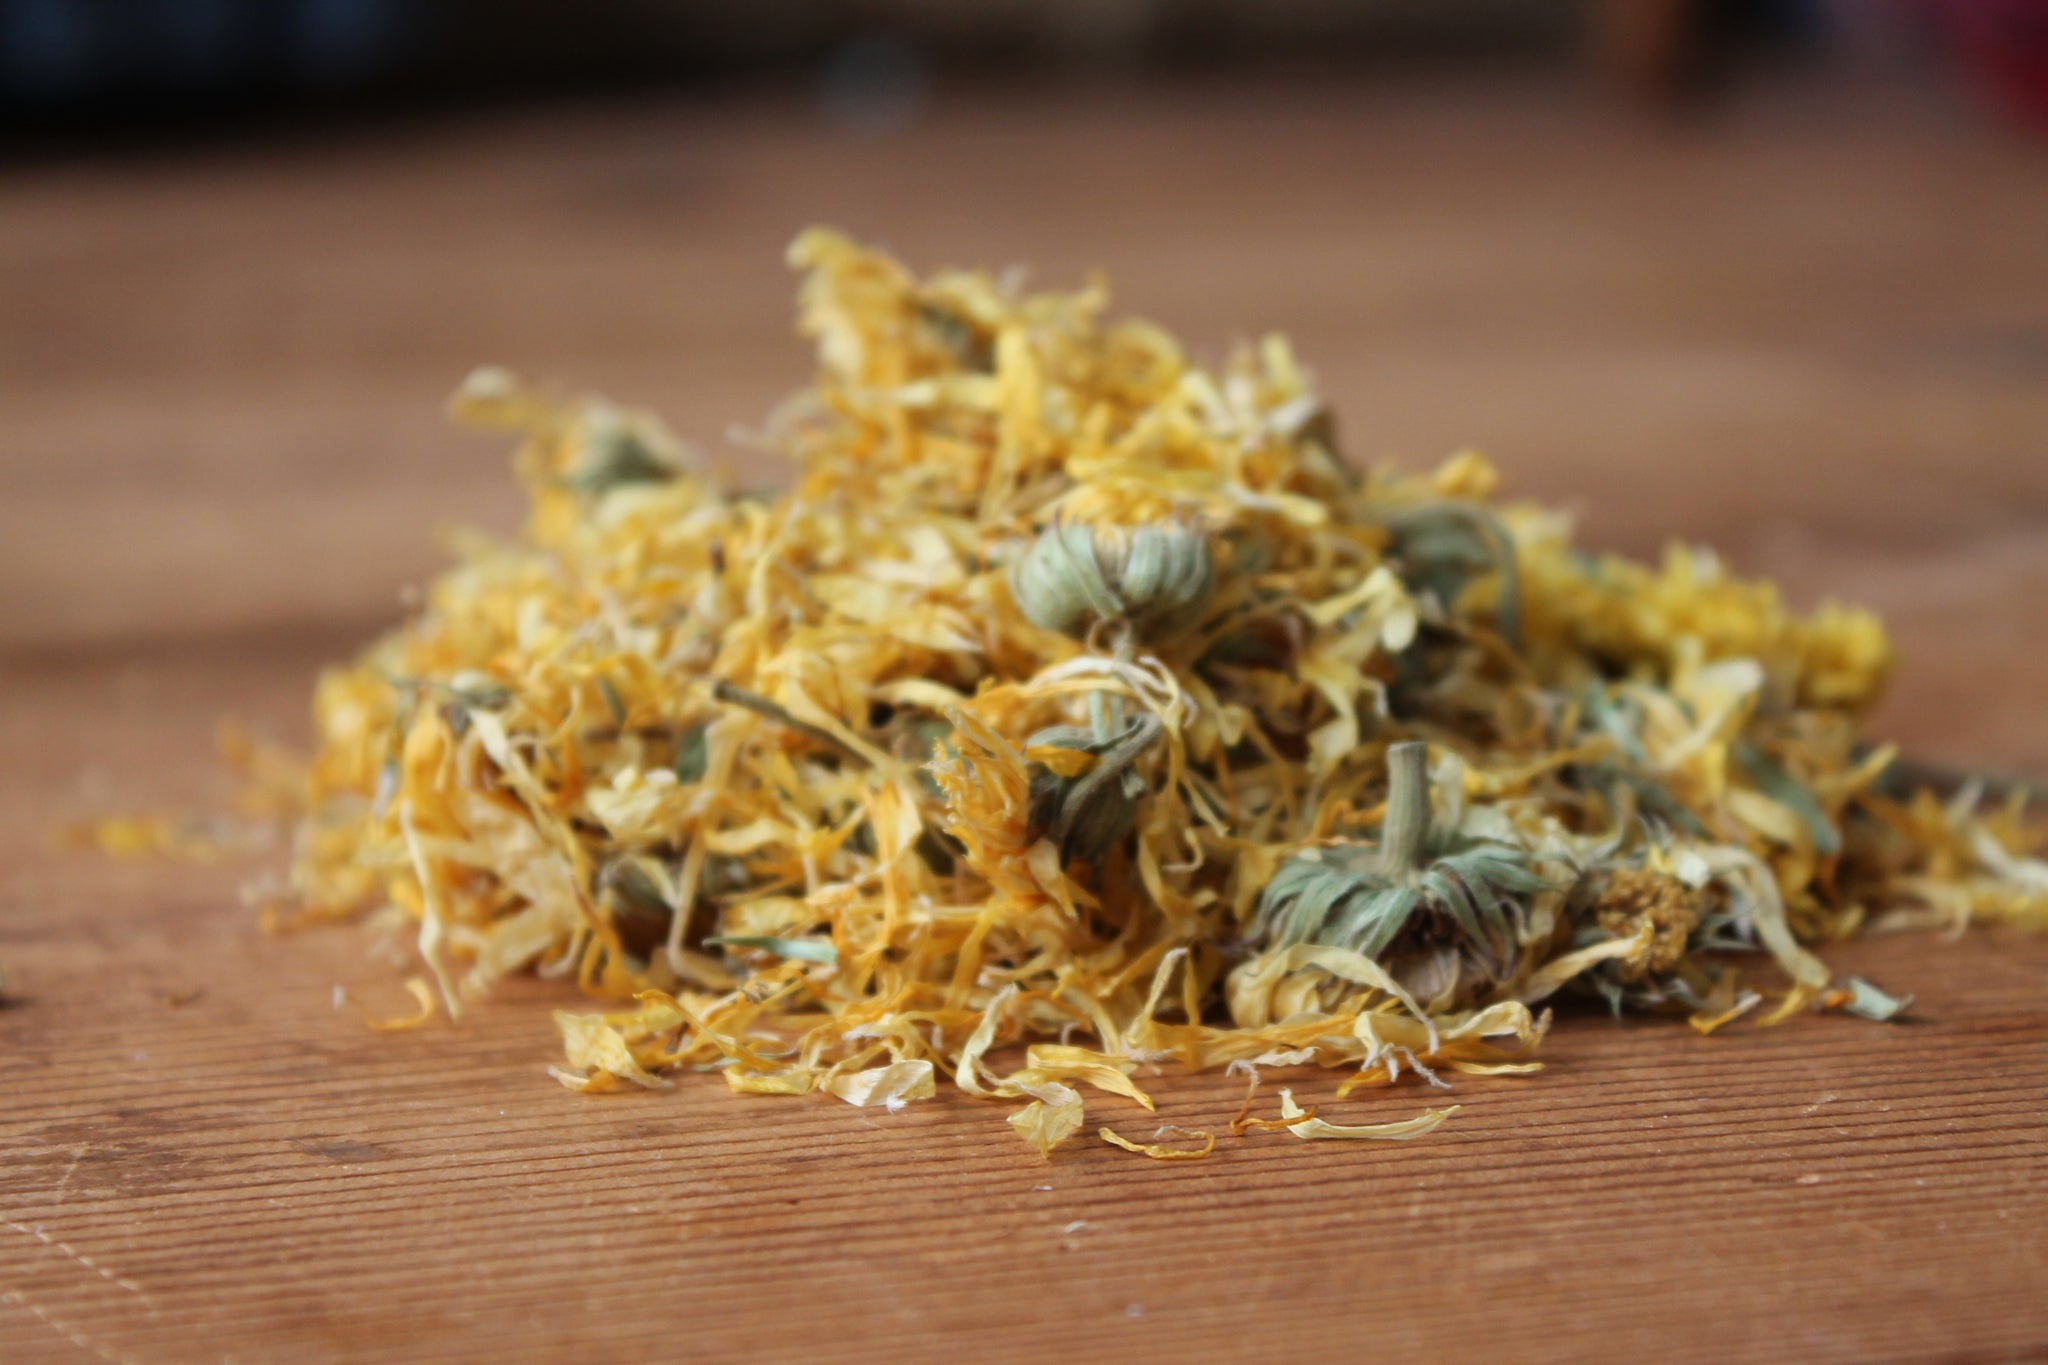 Organic Calendula Flowers - They are one of my most powerful ingredients